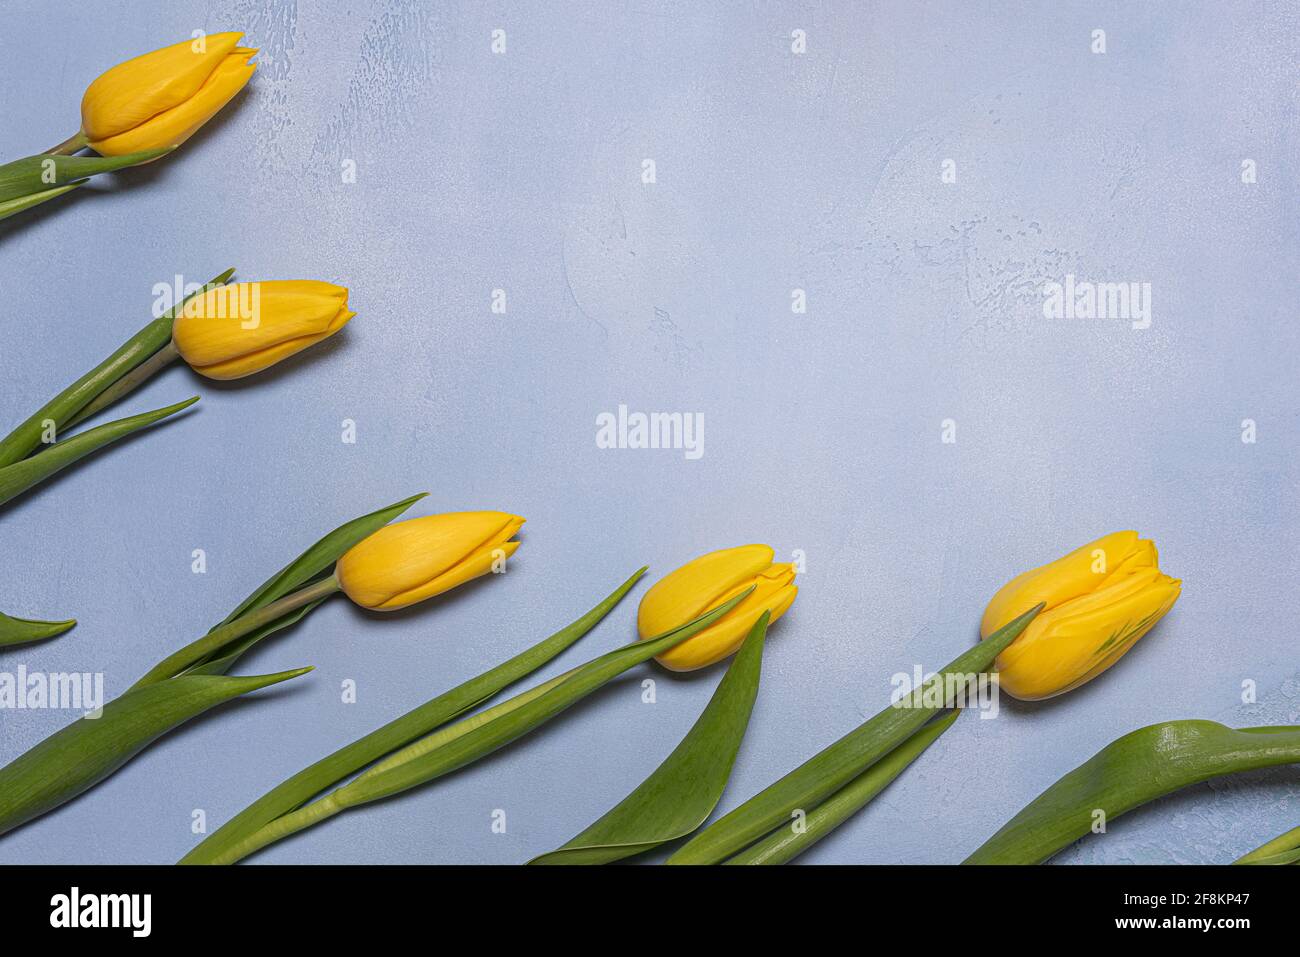 Group of natural yellow tulip flowers with green leaves on blue textured concrete. Seasonal background with fresh natural flower flat lay arrangement Stock Photo